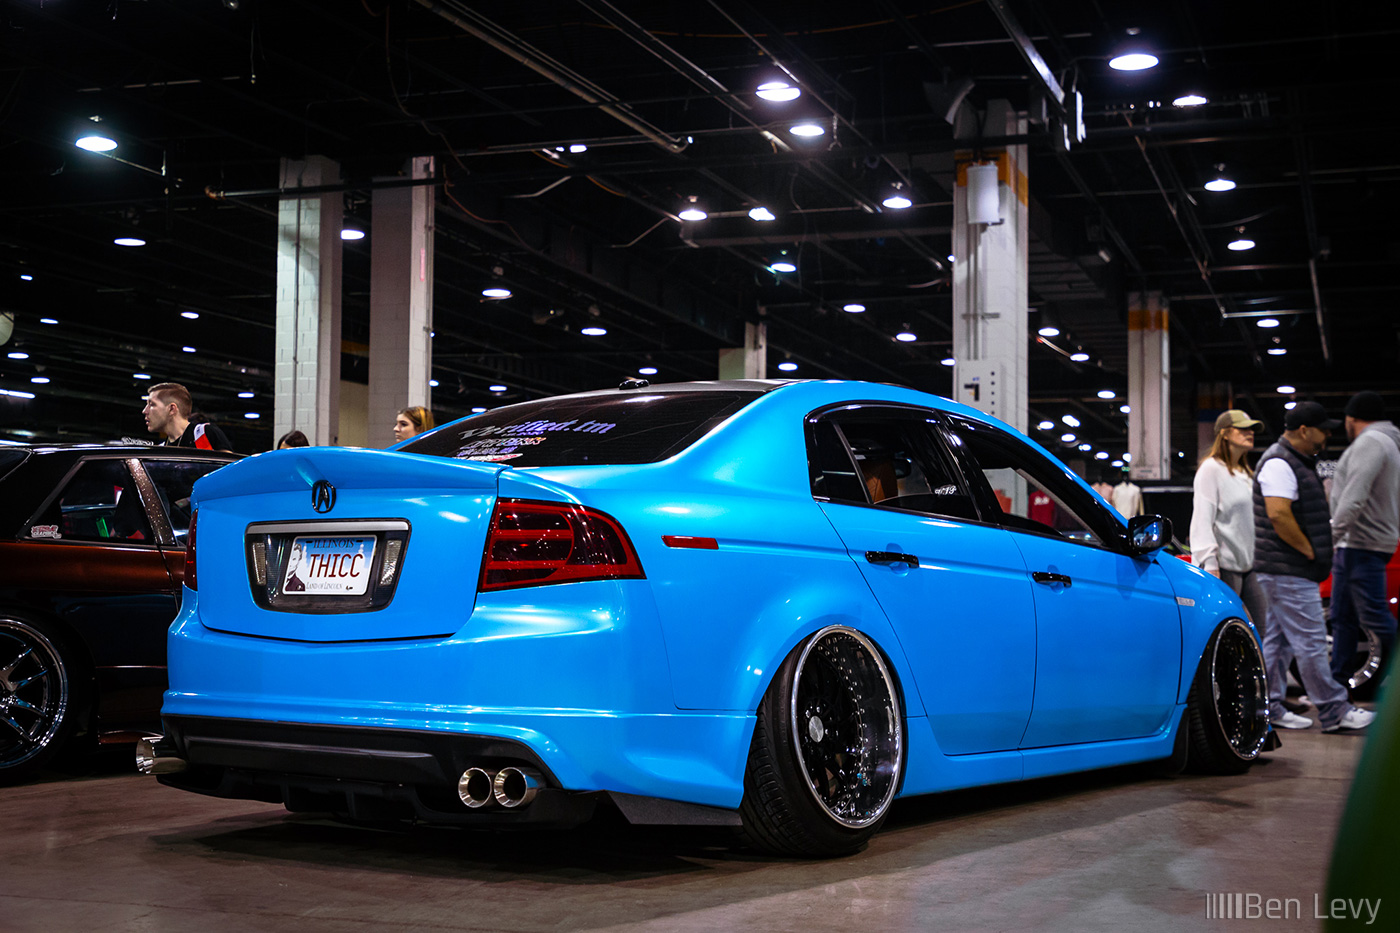 Bagged Acura TL Wrapped in Custom Blue